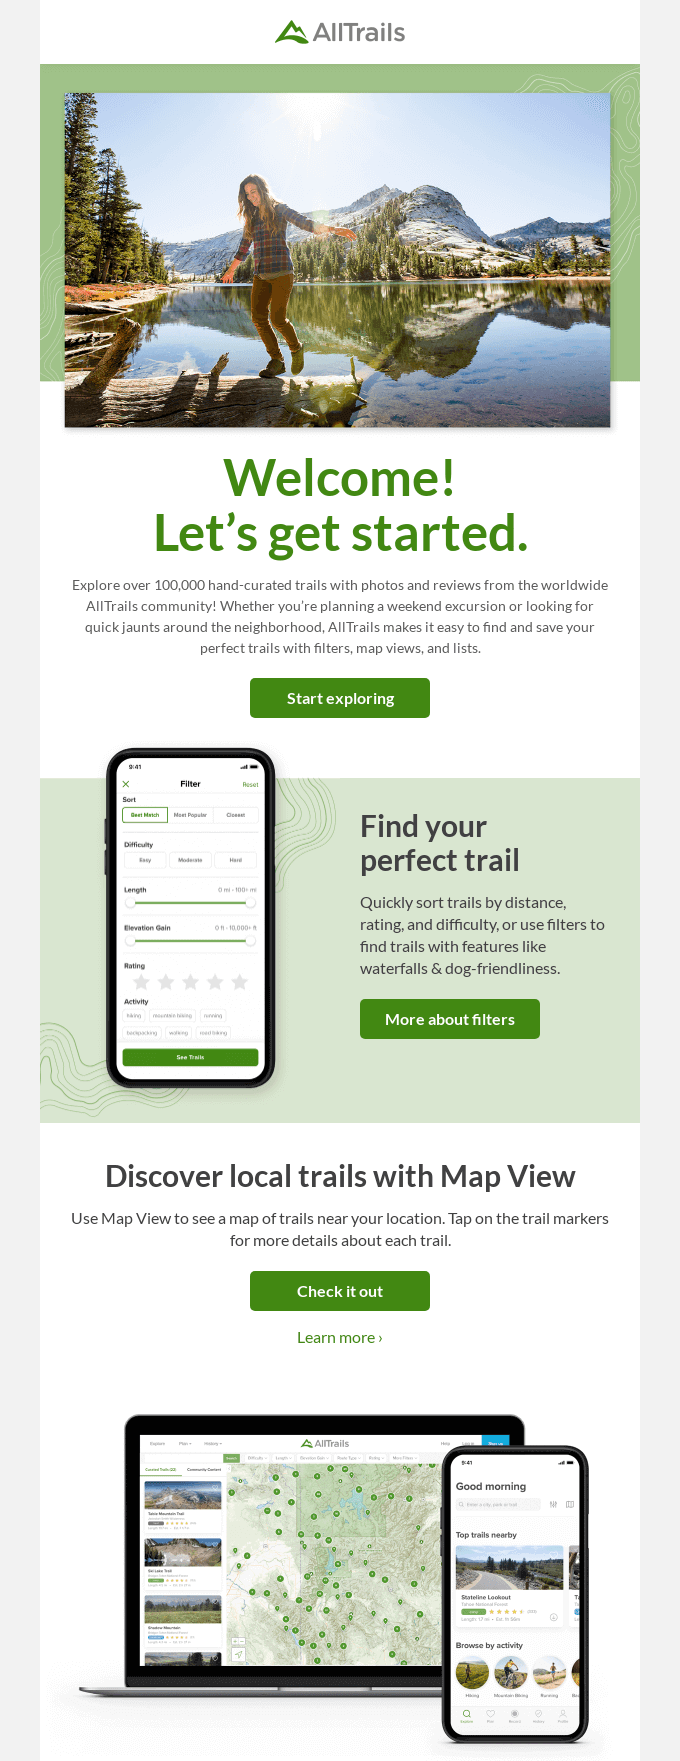 Welcome email from AllTrails